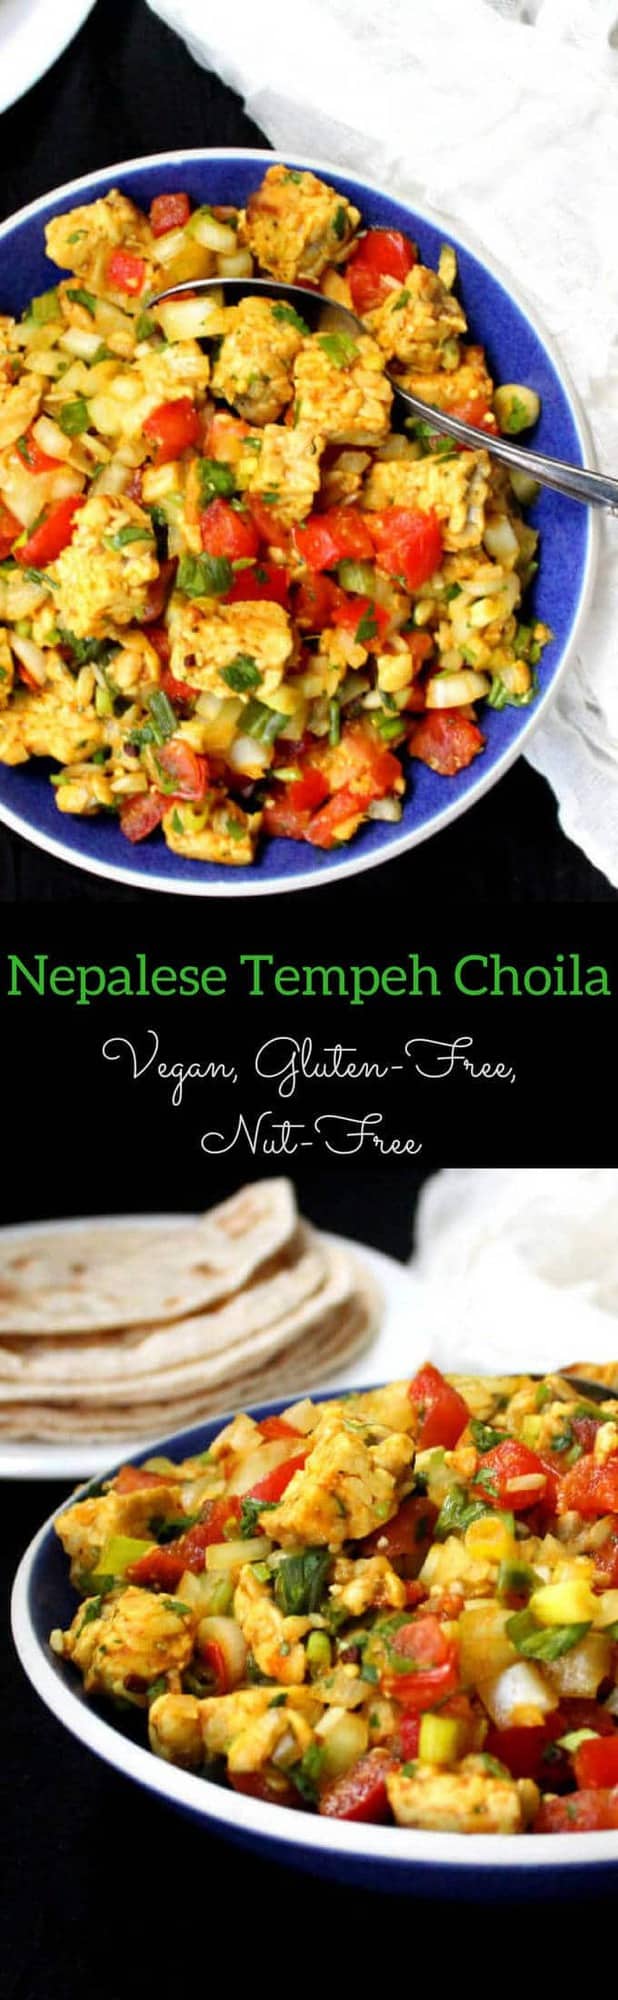 Nepalese Tempeh Choila, a fresh salad of veggies and broiled tempeh, Nepalese style - holycowvegan.net